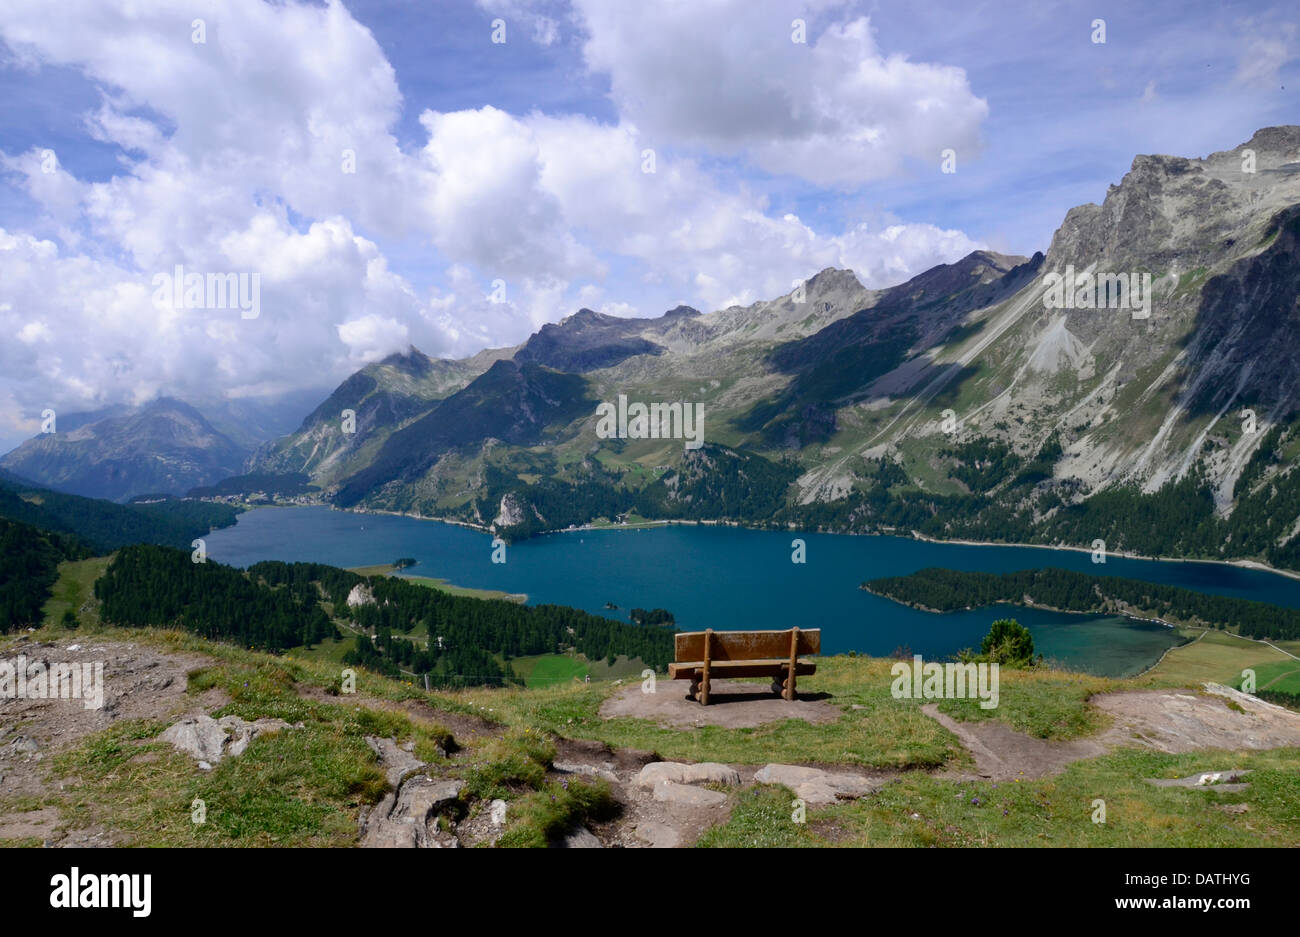 After the walk up to this wonderful view over Lake Sils this bench is very inviting! Stock Photo